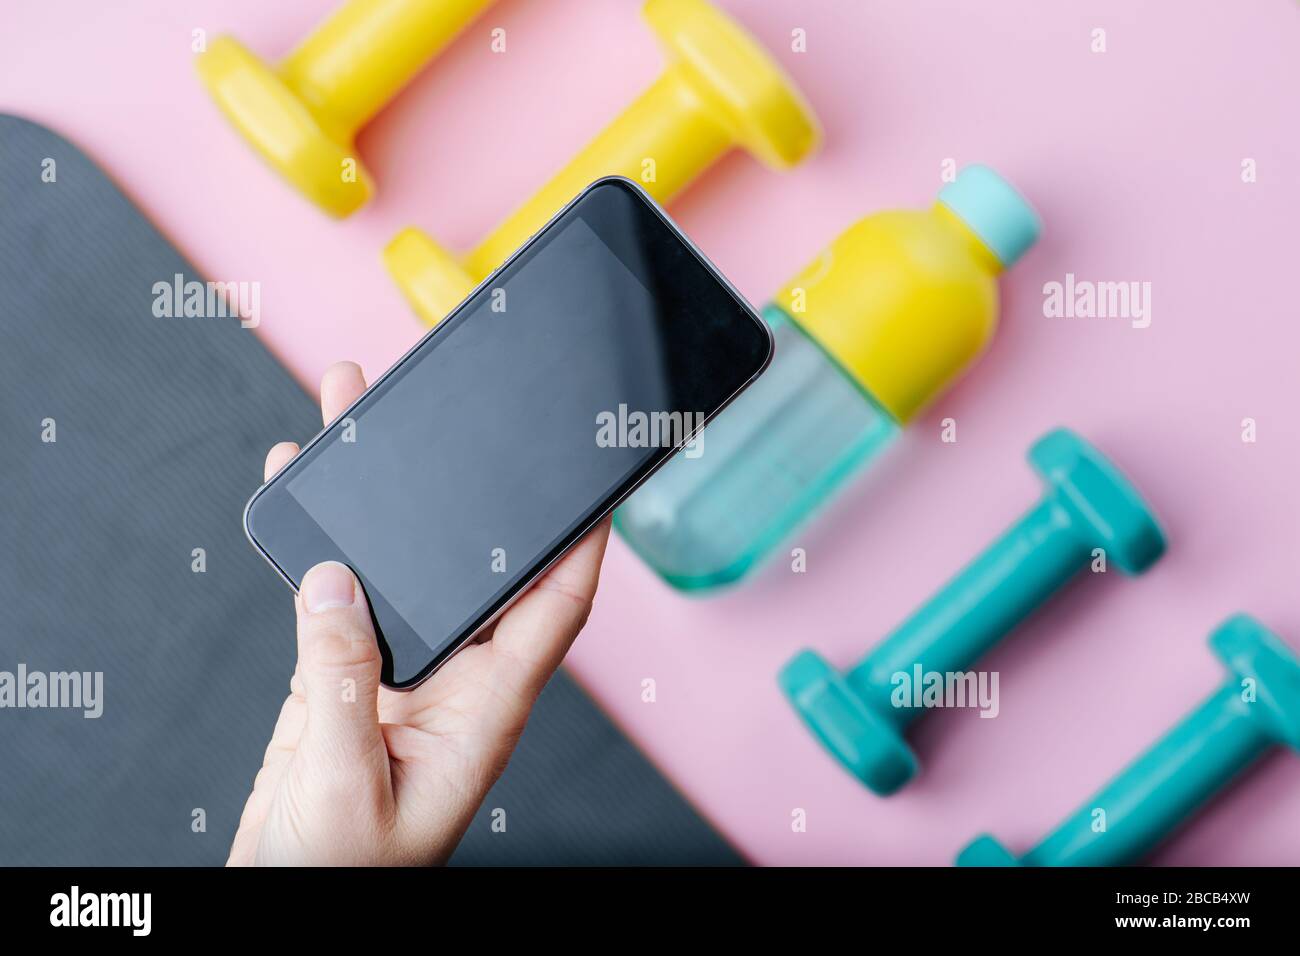 Hand taking a picture of dumbbells and bottle of water lying on a mat. Top view. Stock Photo